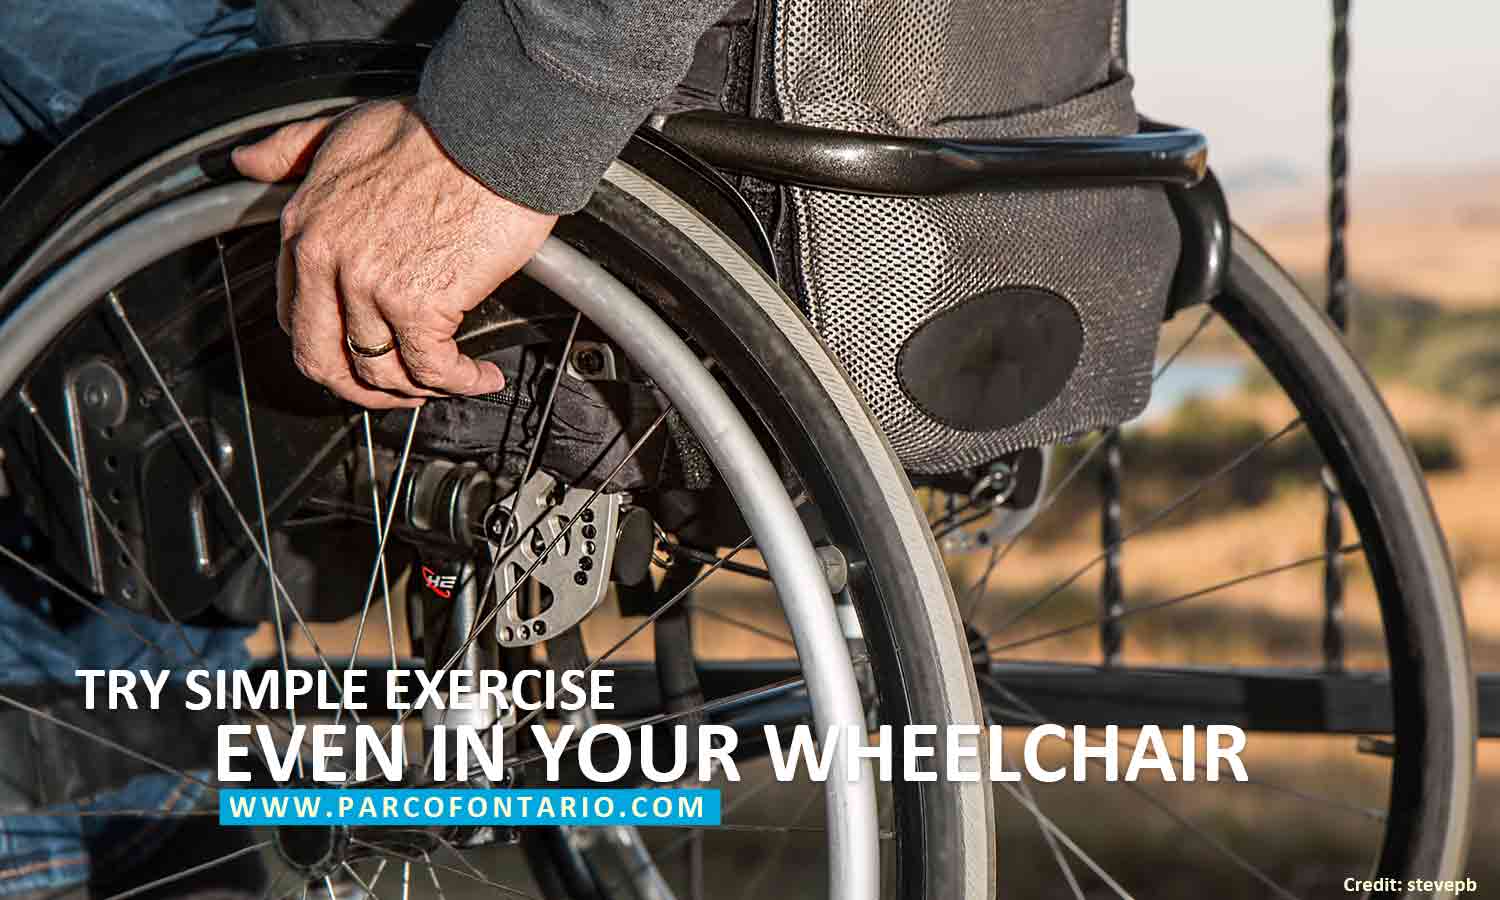 Try simple exercises even in your wheelchair